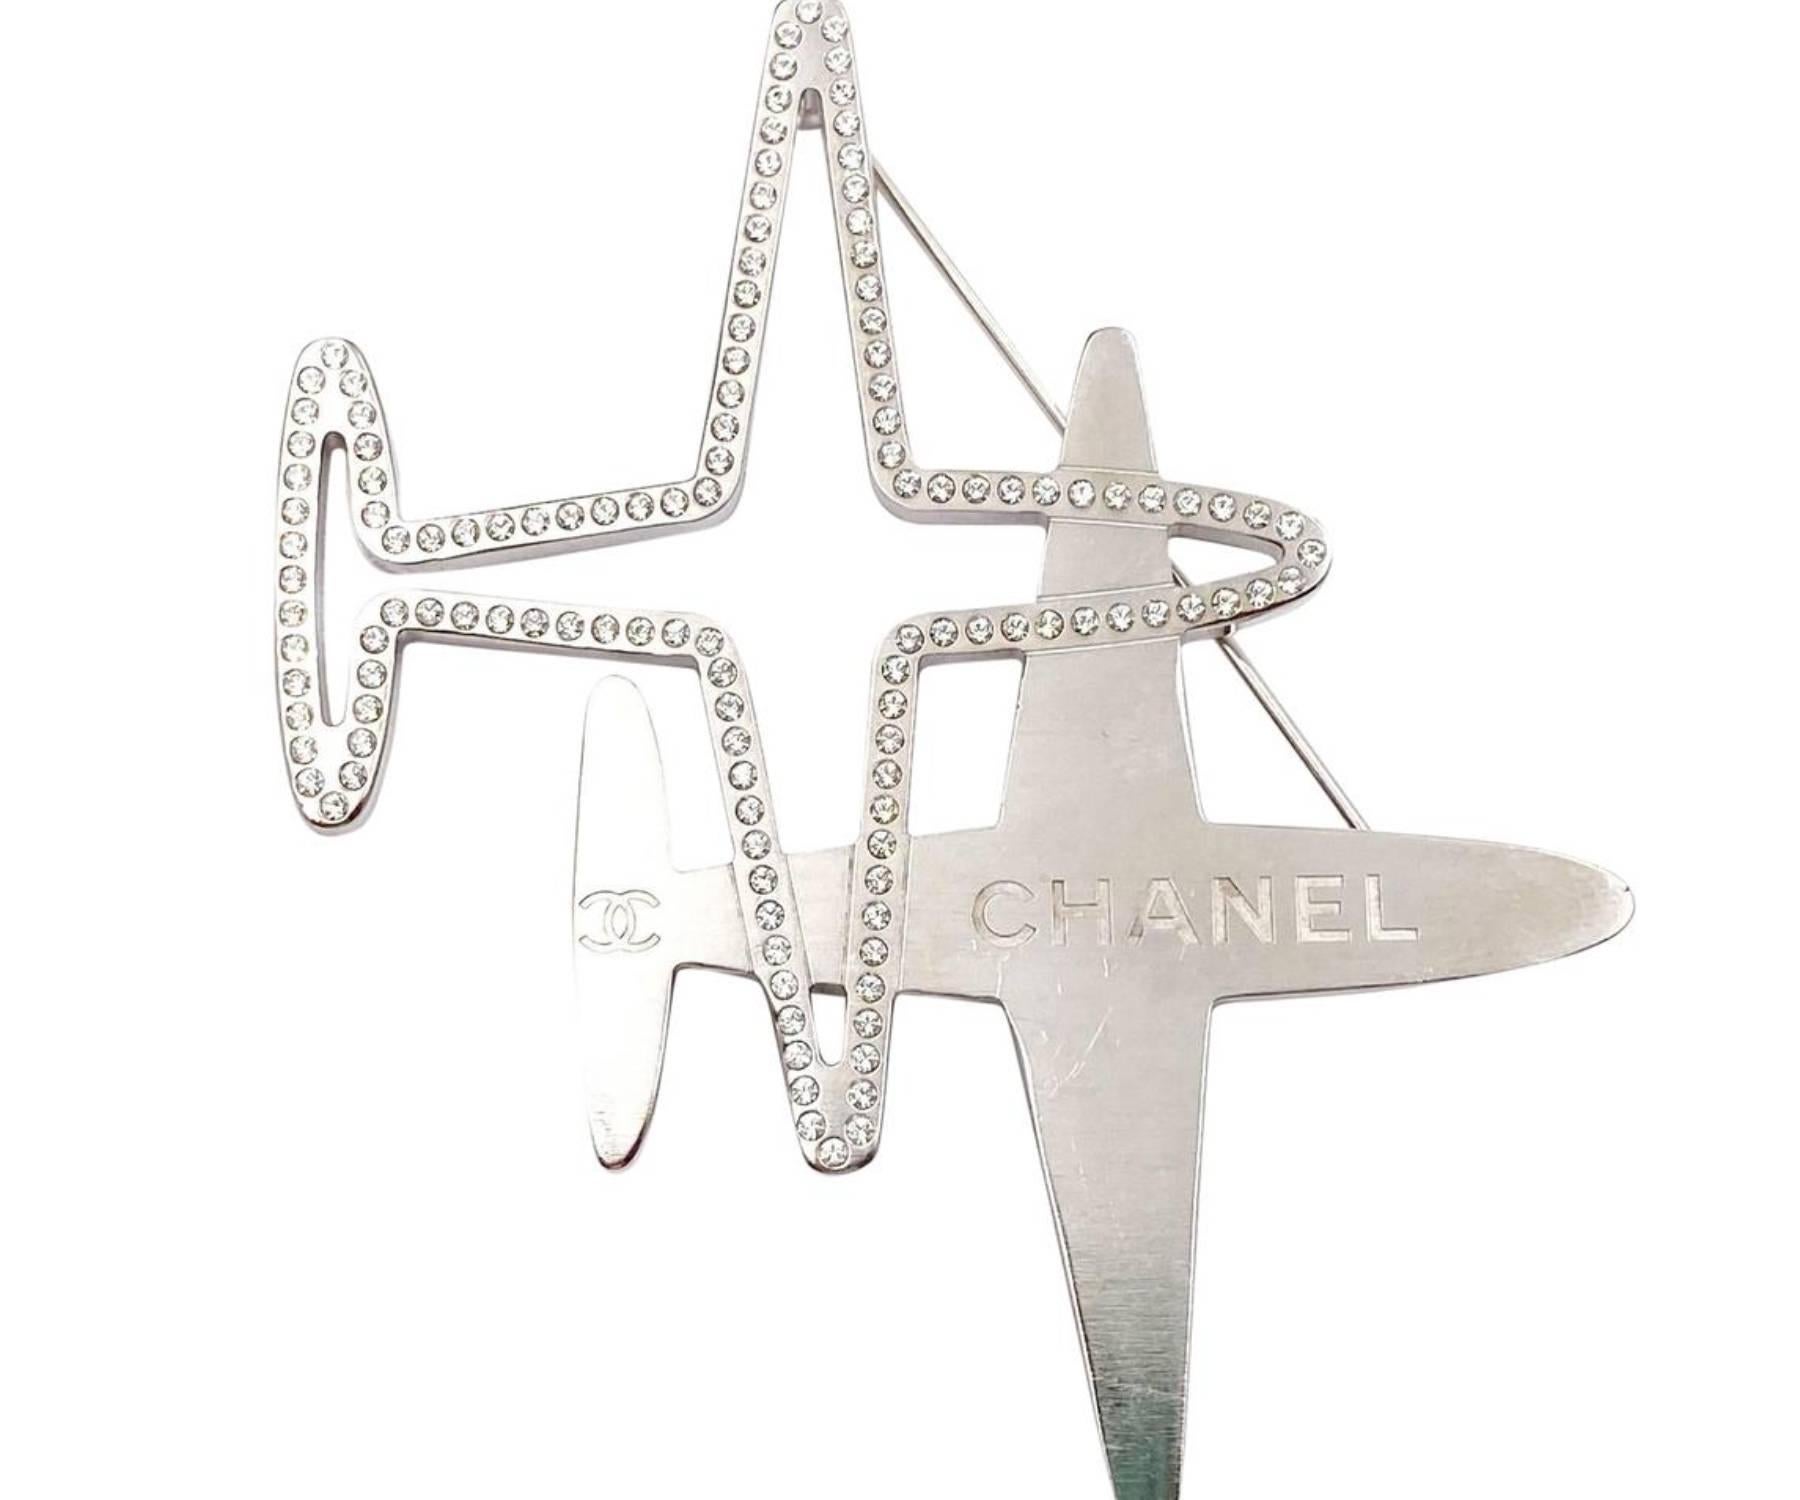 Chanel Silver Double Plane Crystal Large Brooch

*Marked 16
*Made in France
*Comes with the original box

-It is approximately 3.25